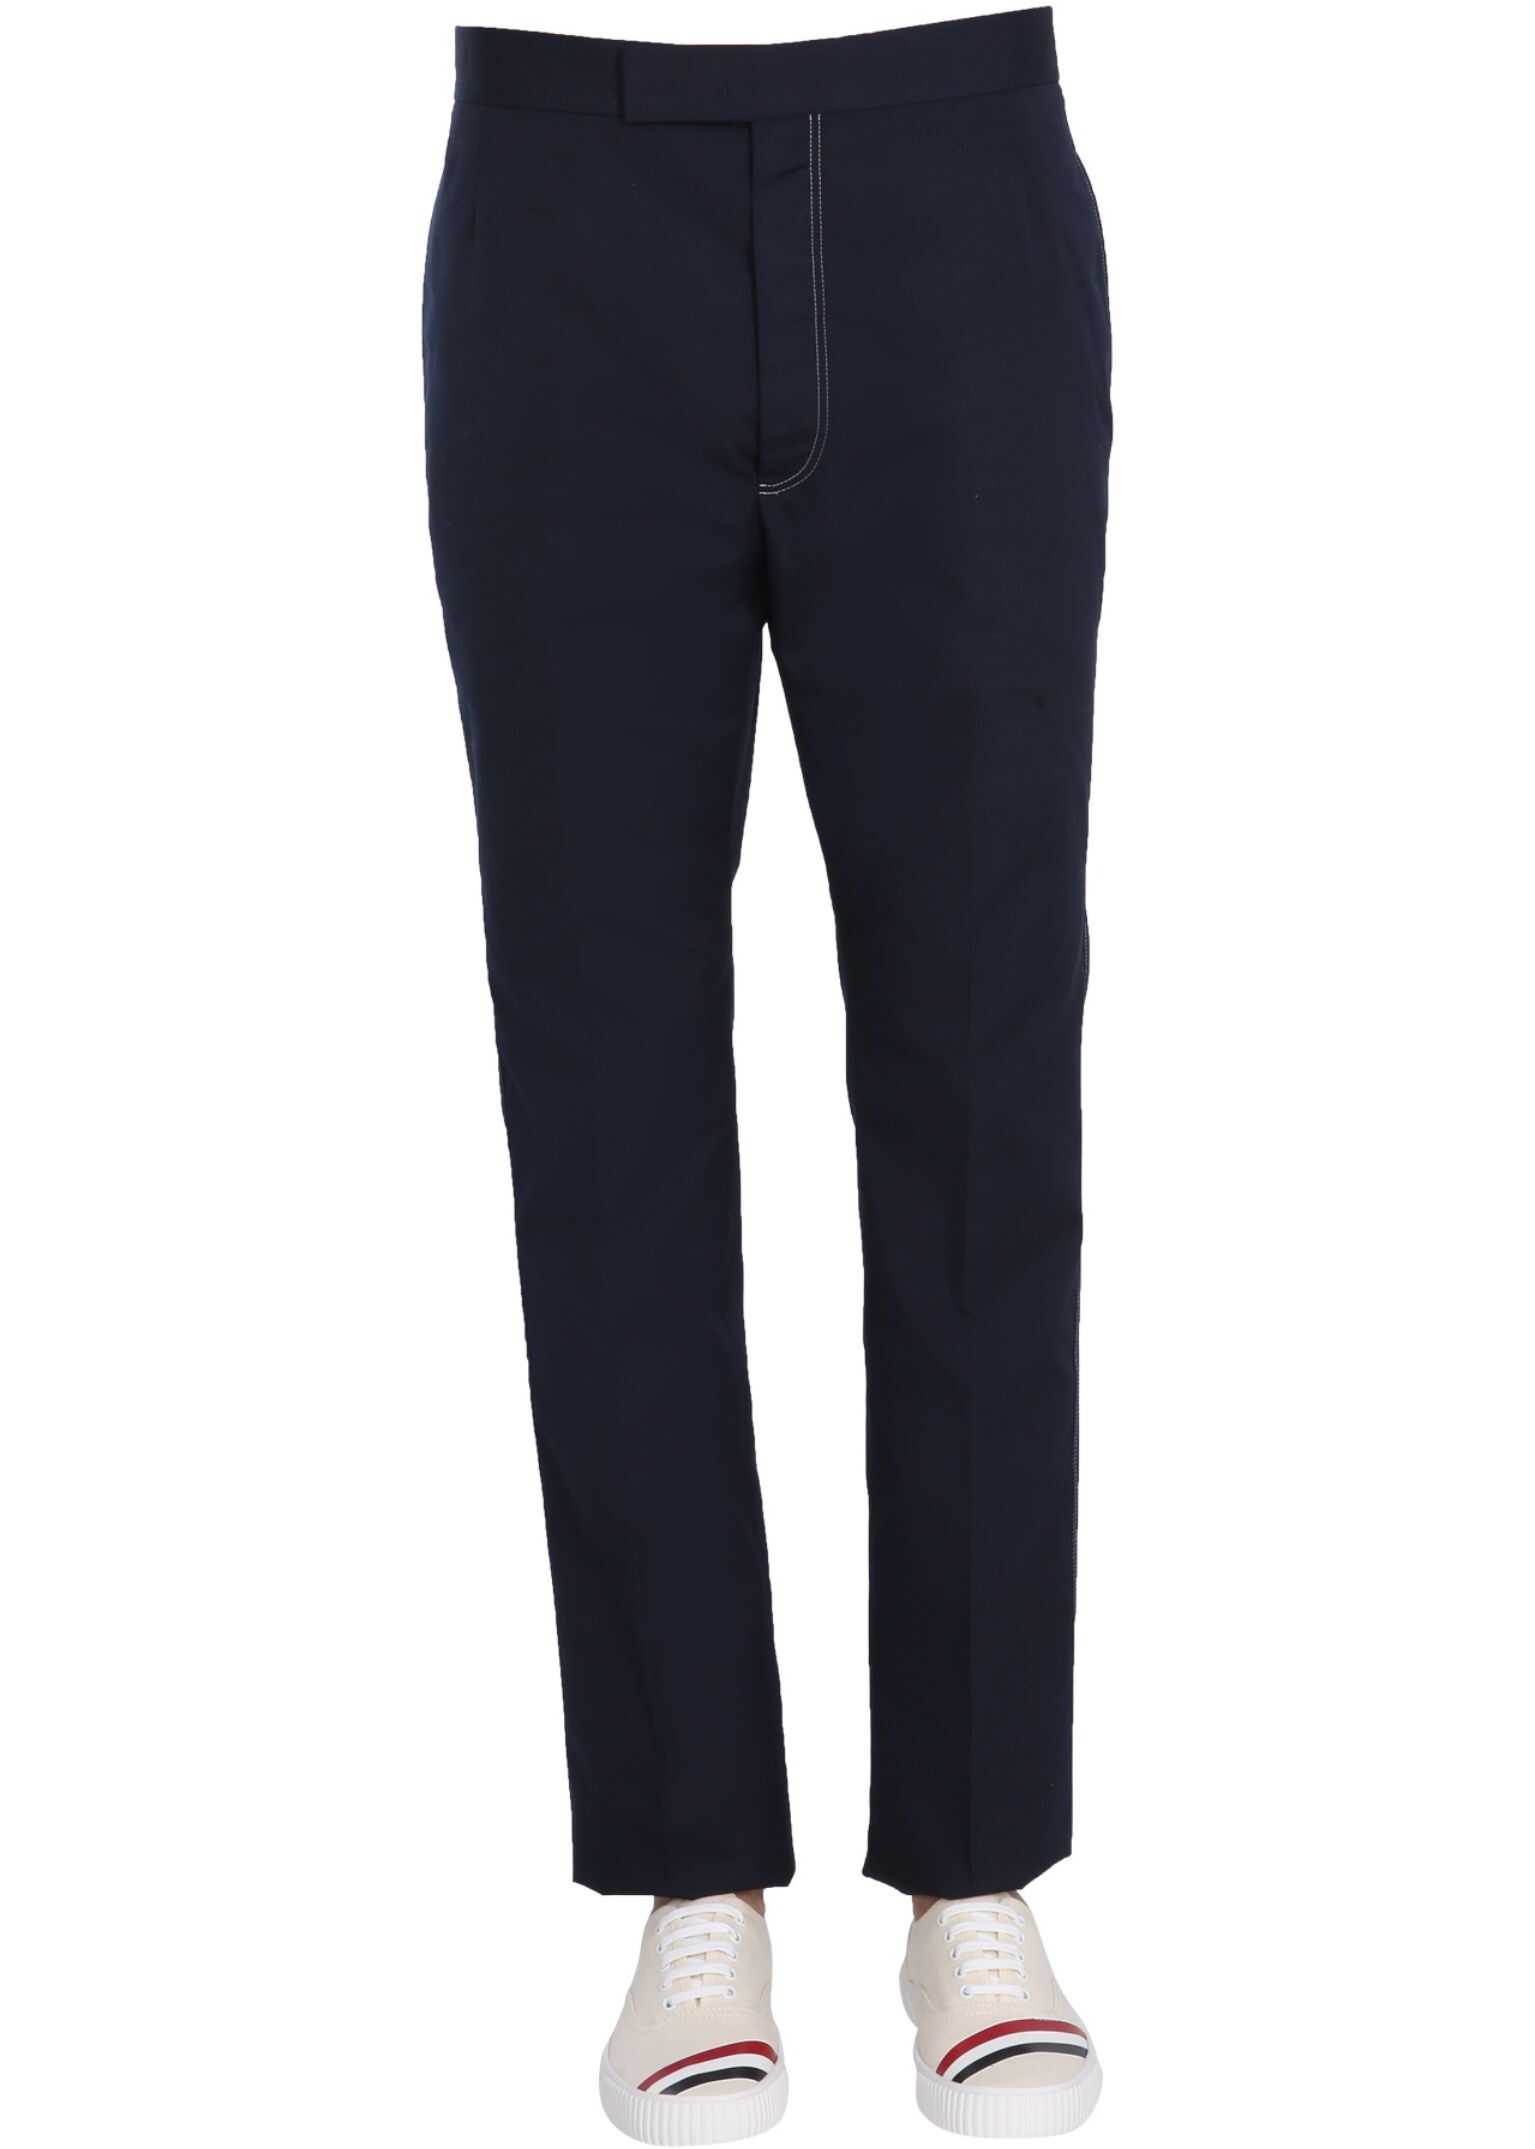 Thom Browne Trousers With Contrast Stitching MTC001G_04502415 BLUE image